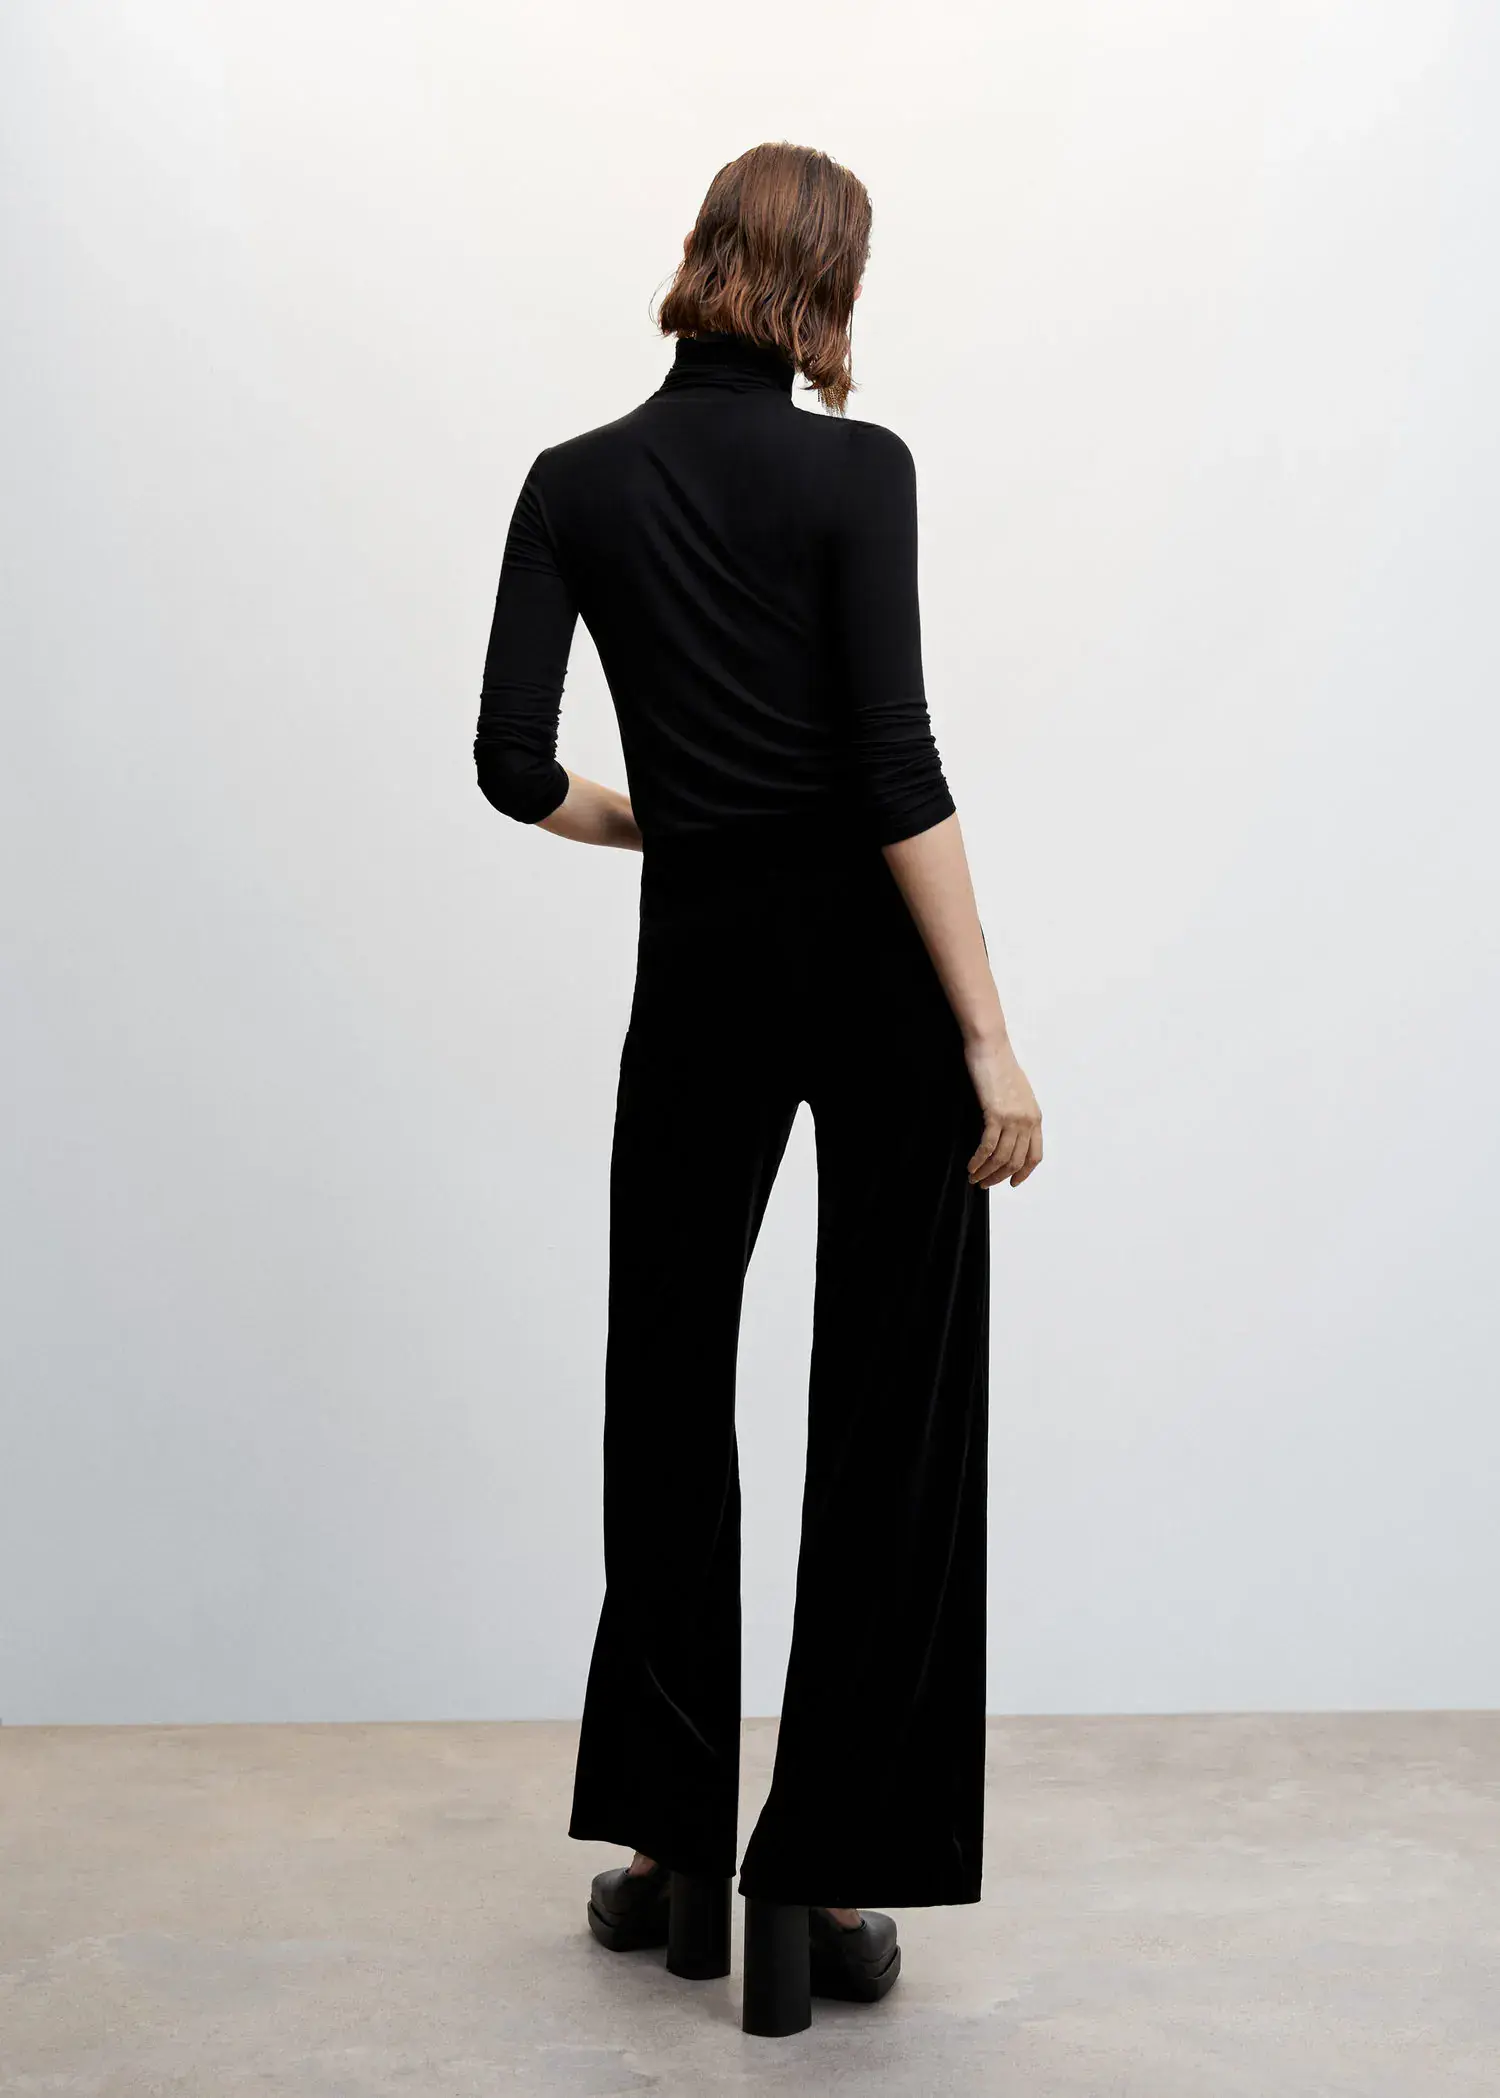 Mango Velvet palazzo trousers. a woman wearing a black outfit standing in a room. 